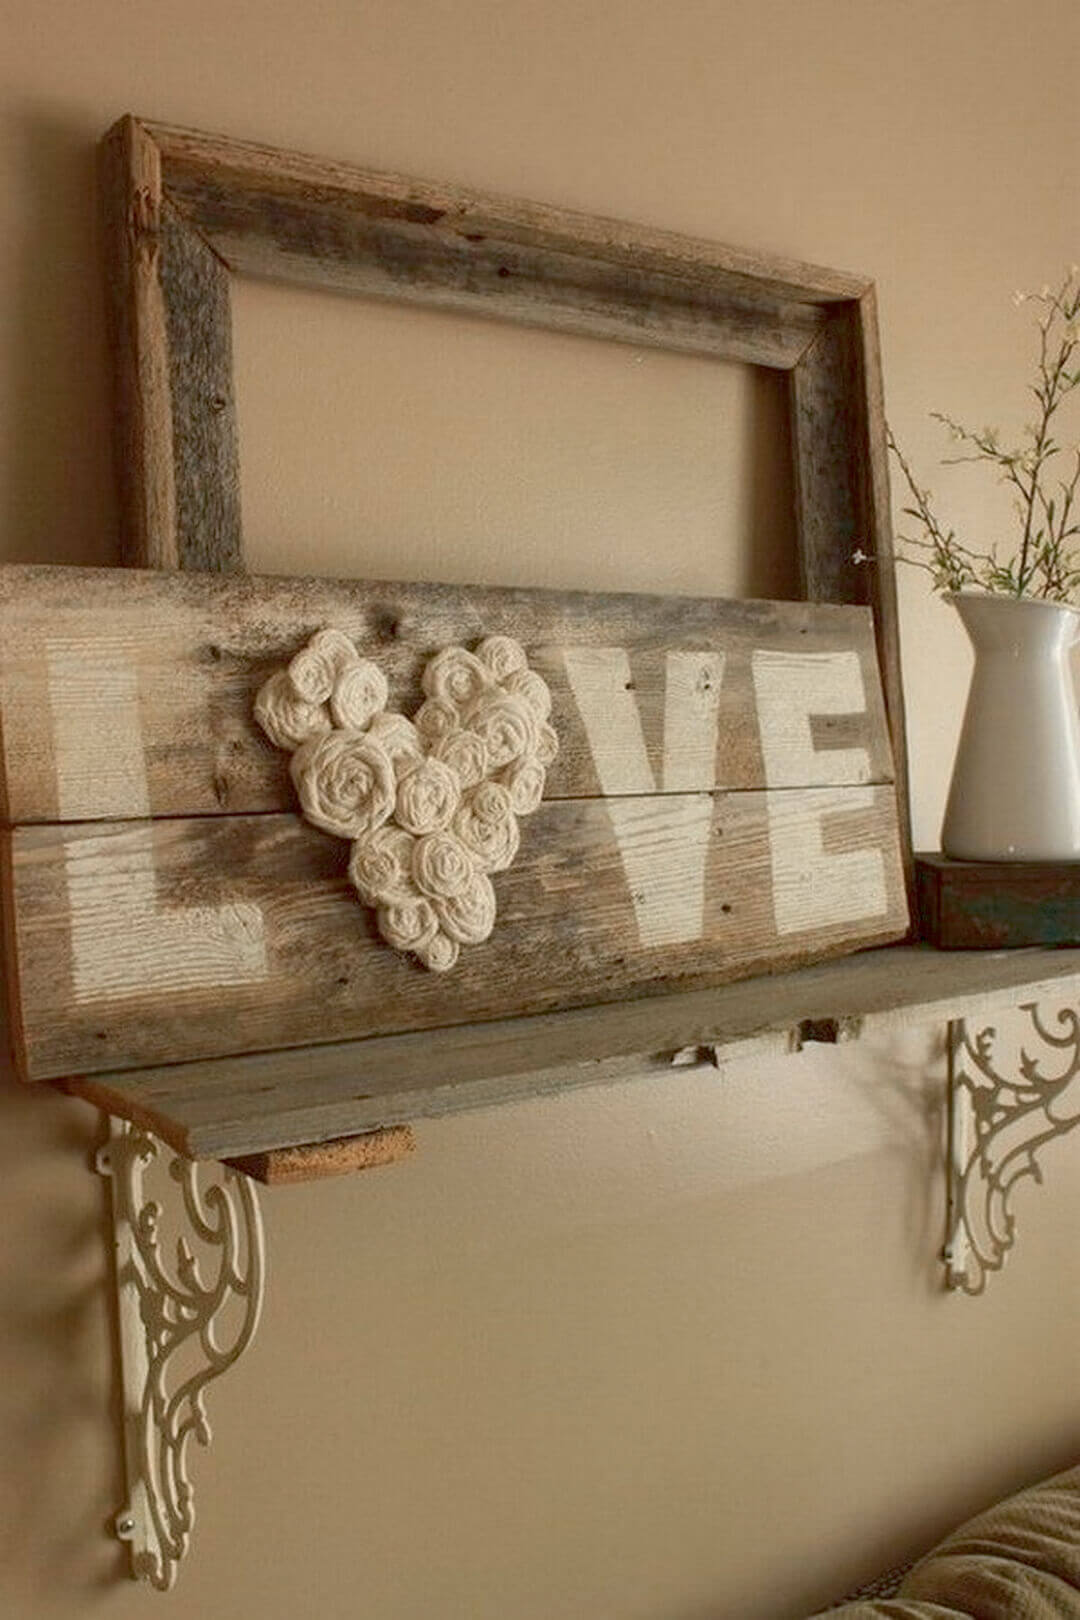 Share Your Love of Shabby Chic Style